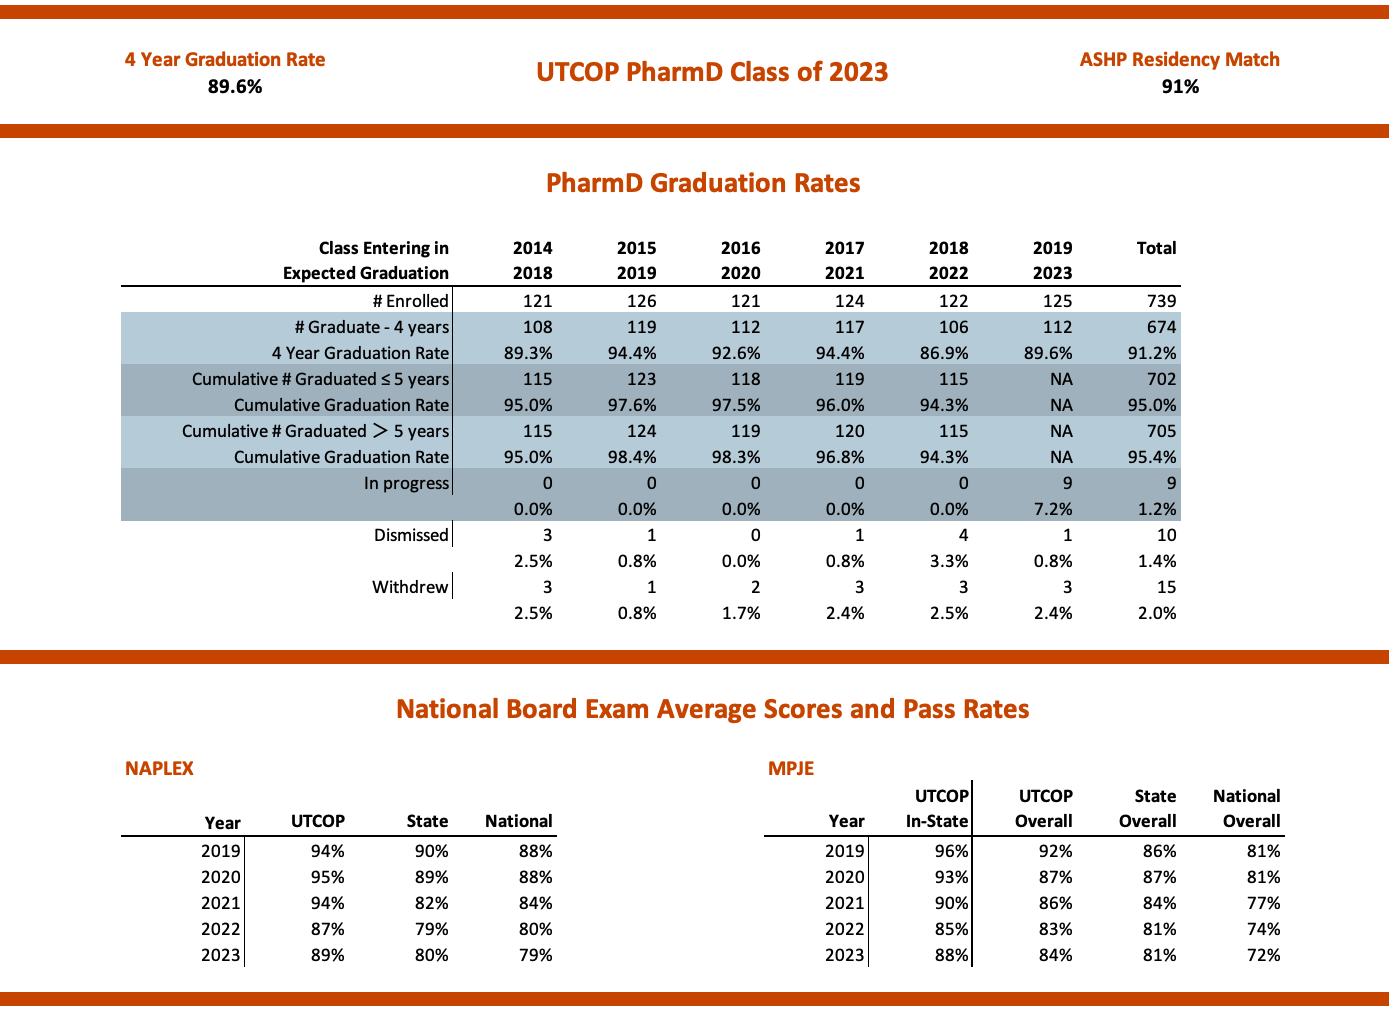 Pharm.D. graduation rates for classes of 2018 to 2023 and exam statistics for 2019 to 2023